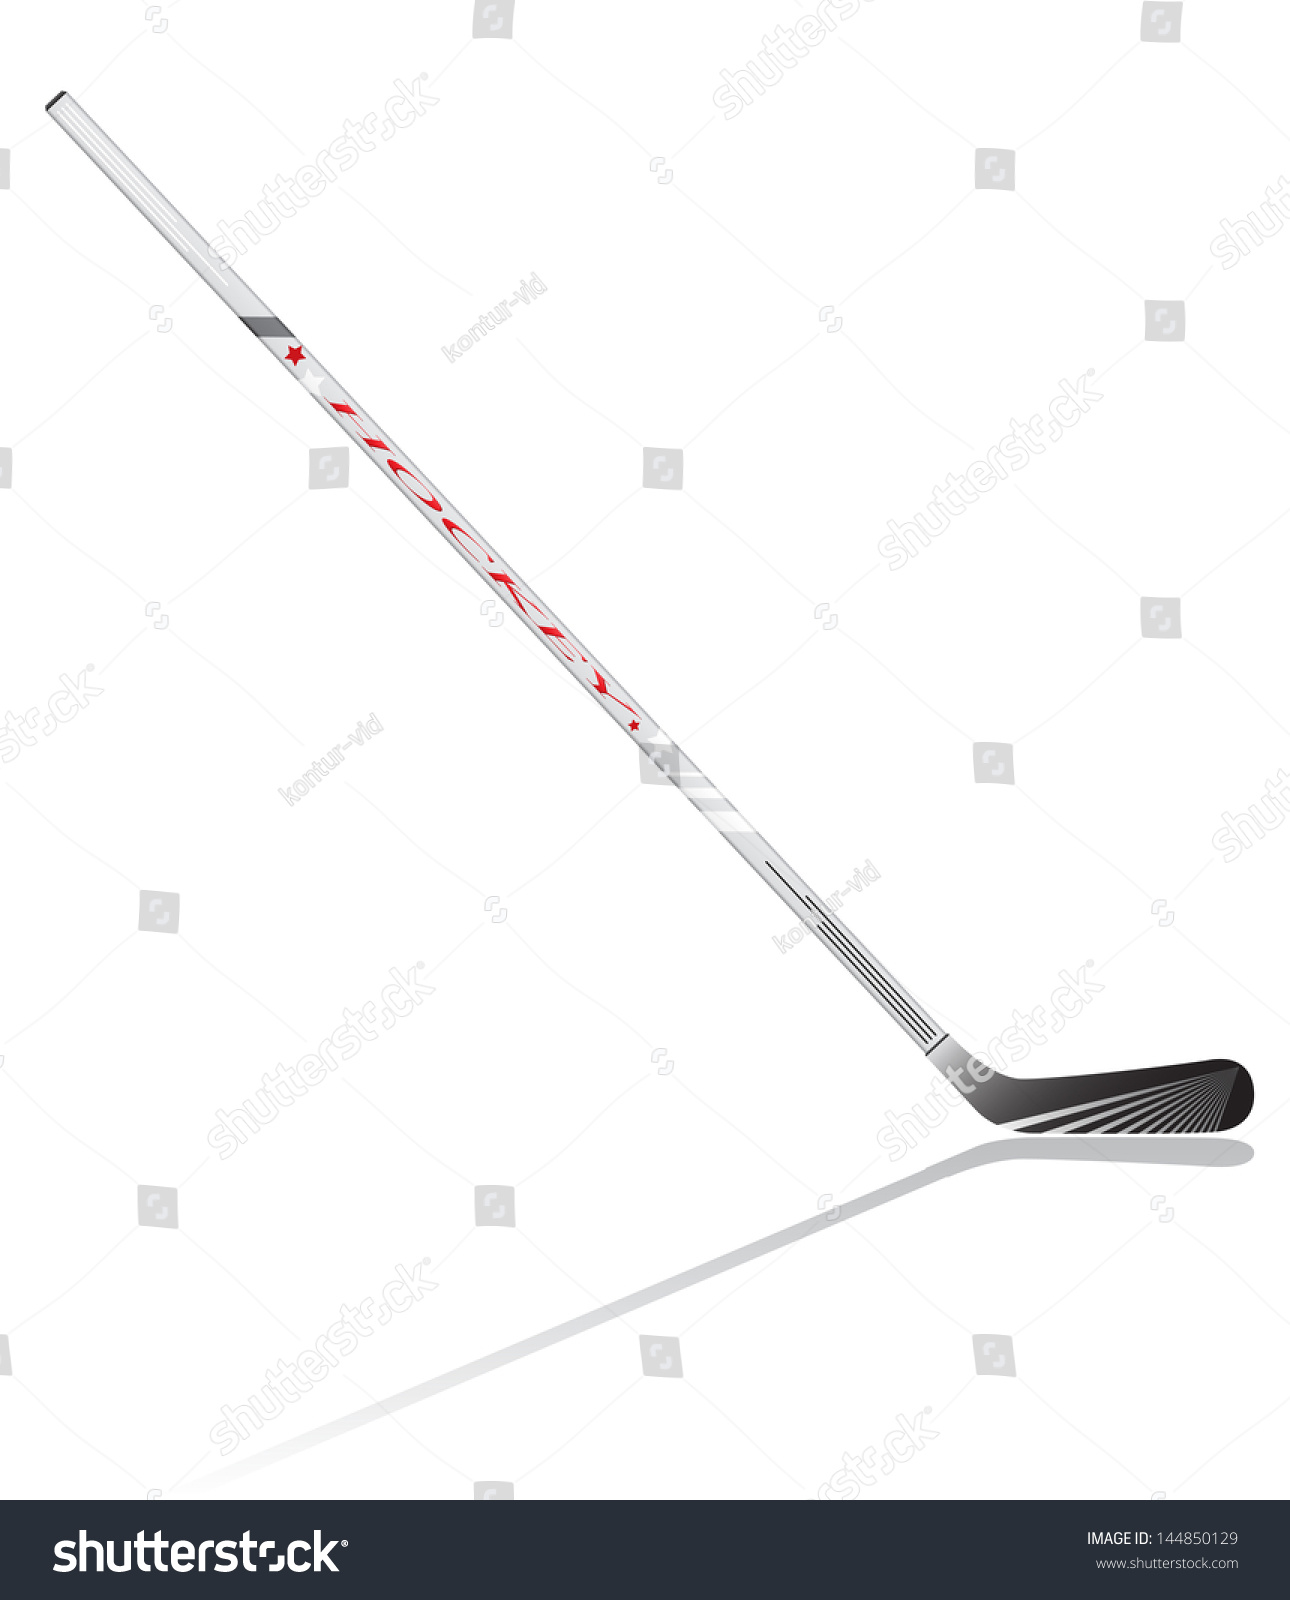 Hockey Stick Vector Illustration Isolated On Stock Vector (Royalty Free